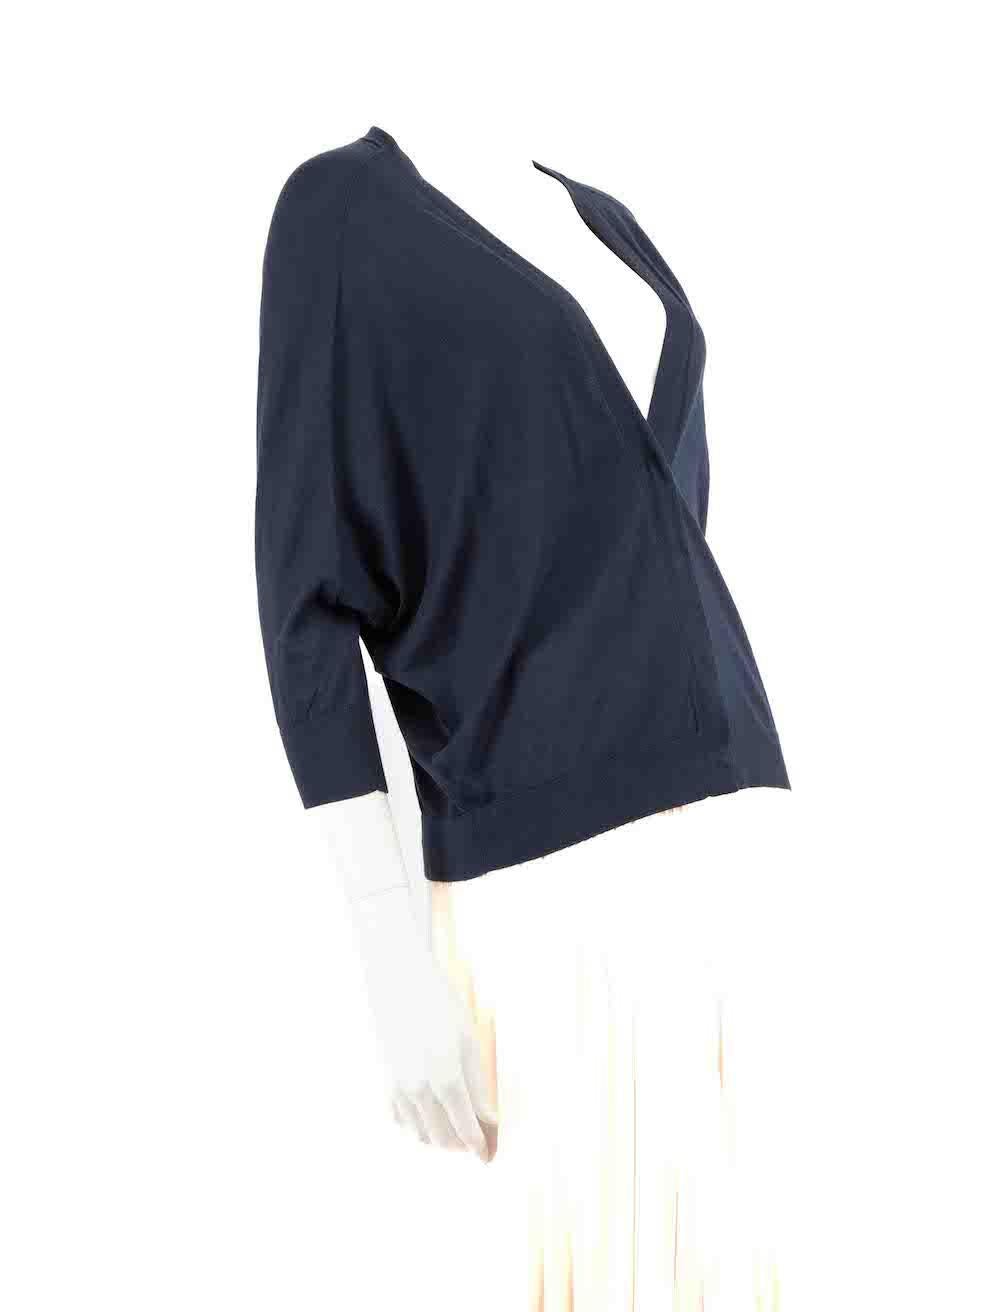 CONDITION is Very good. Minimal wear to cardigan is evident. The snap buttons are becoming loose on this used Brunello Cucinelli designer resale item.
 
 
 
 Details
 
 
 Navy
 
 Cotton
 
 Knit cardigan
 
 V-neck
 
 Snap button fastening
 
 
 
 
 
